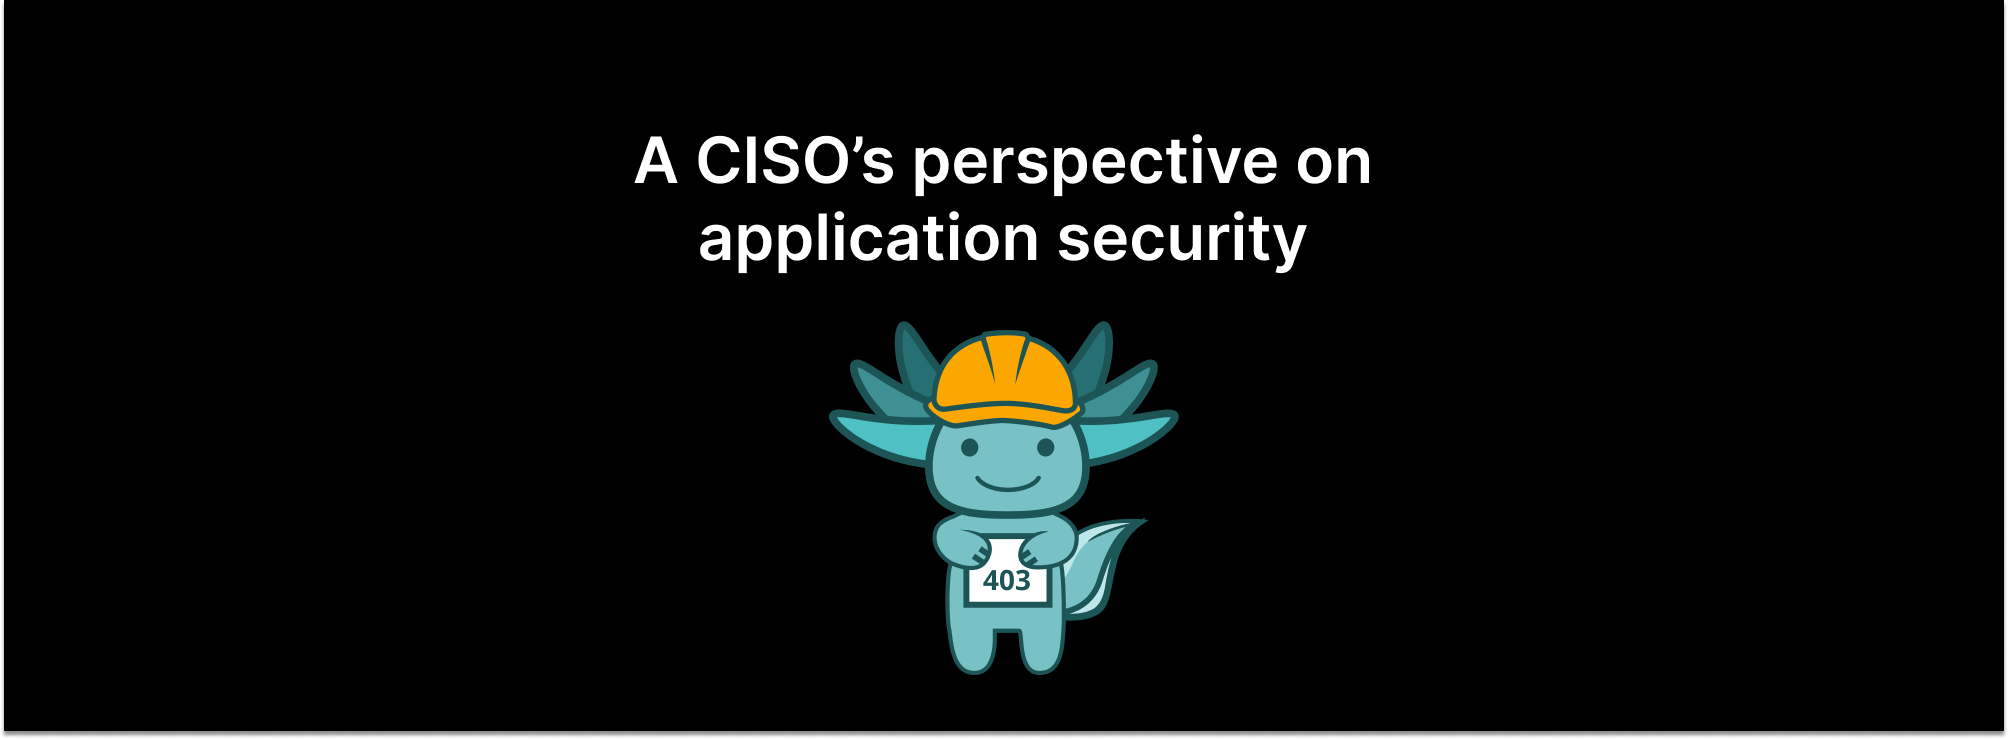 A CISO's perspective on application security